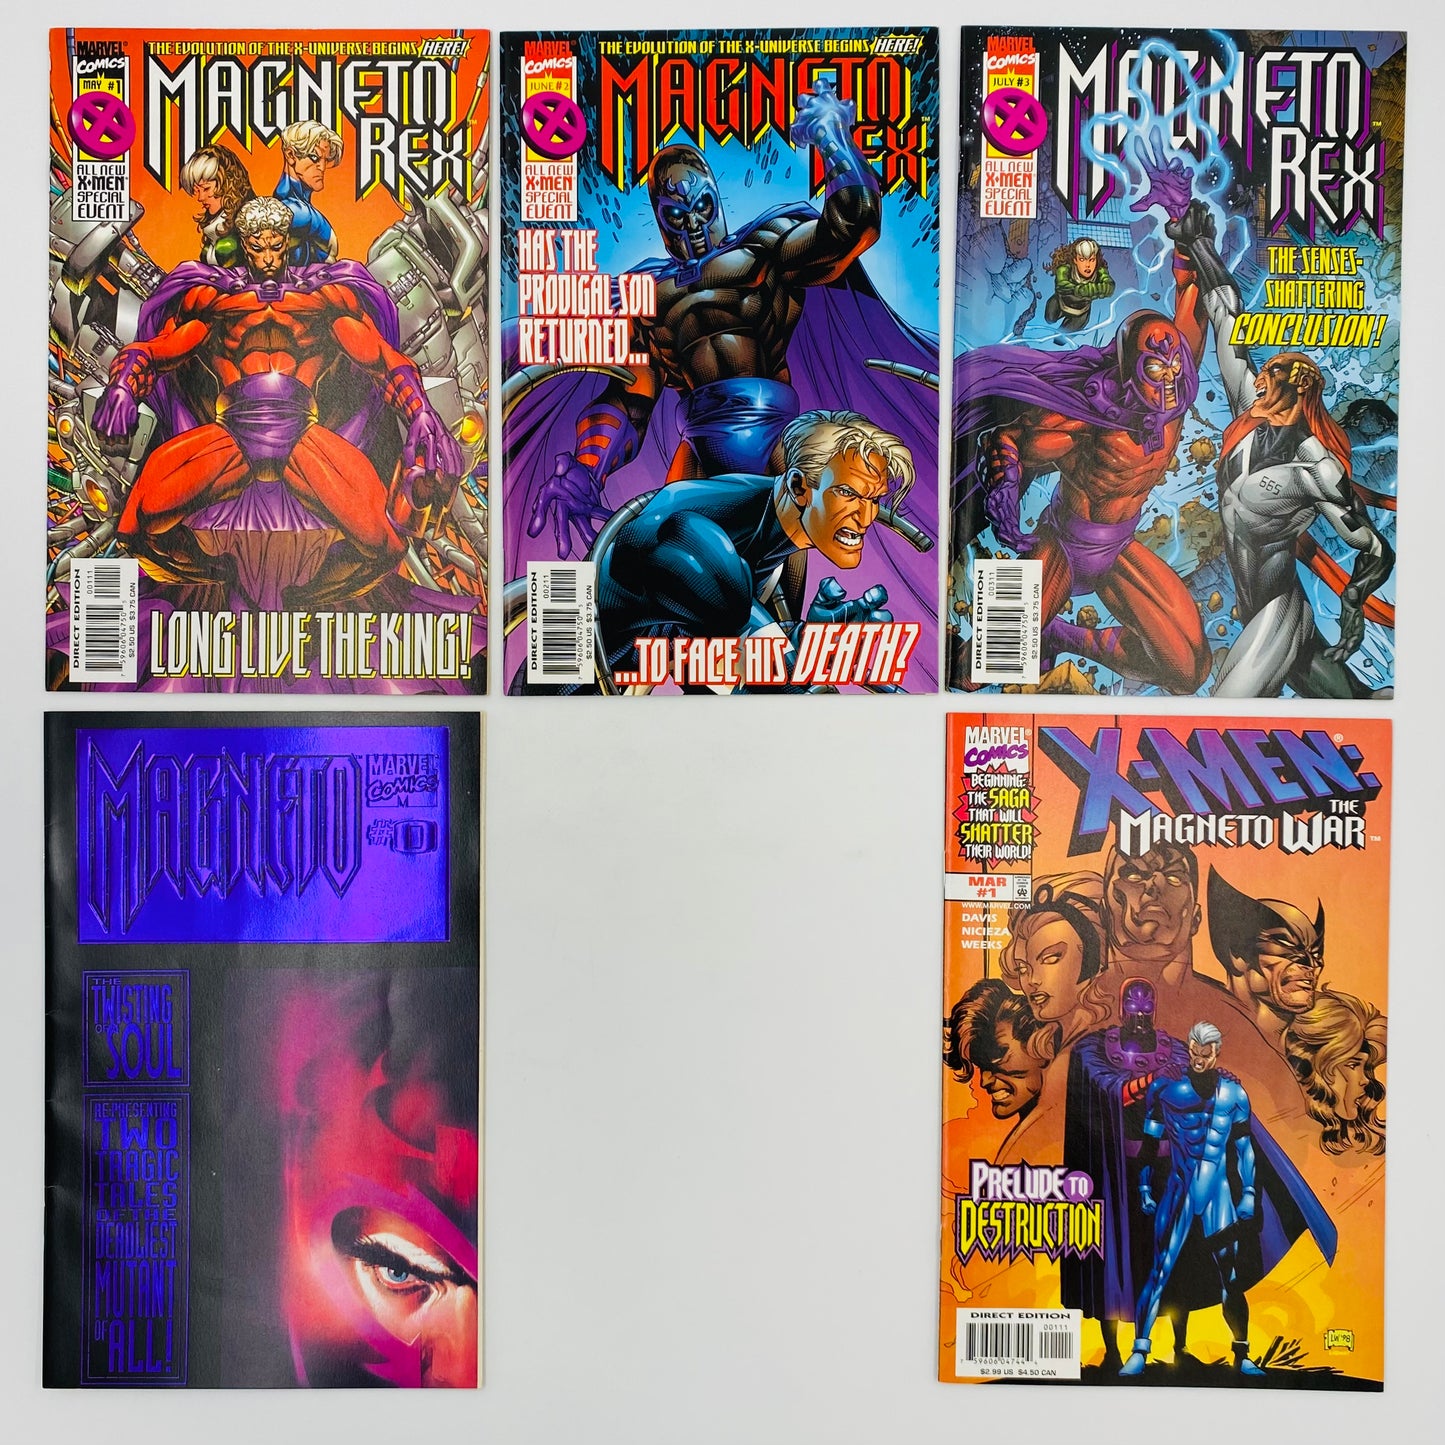 Magneto Fun Pack: Magneto #0 “The Twisting of the Soul” (1993) Magneto #1-4 (1996-1997) X-Men The Magneto War #1 (1999) Magneto Rex #1-3 (1999) Marvel